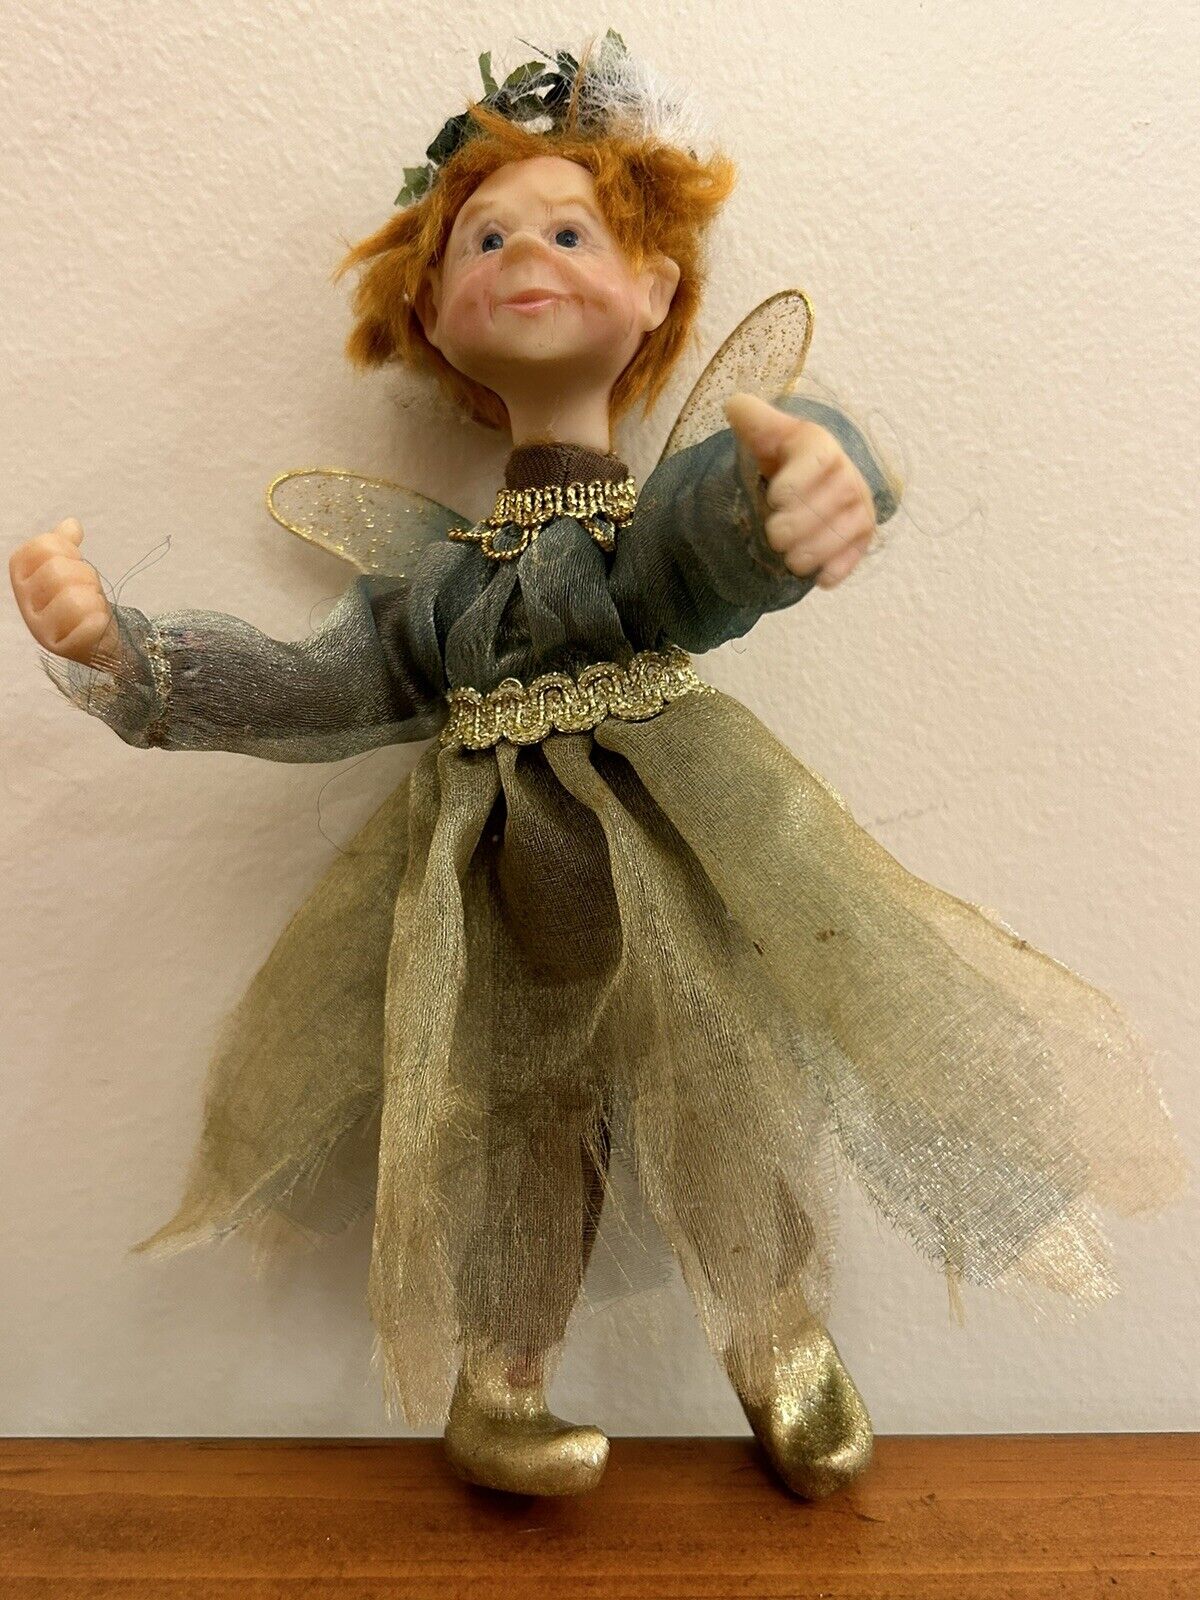 FAIRY GIRL Ornament with Wings Decoration Figure Whimsical 8” Green 2005